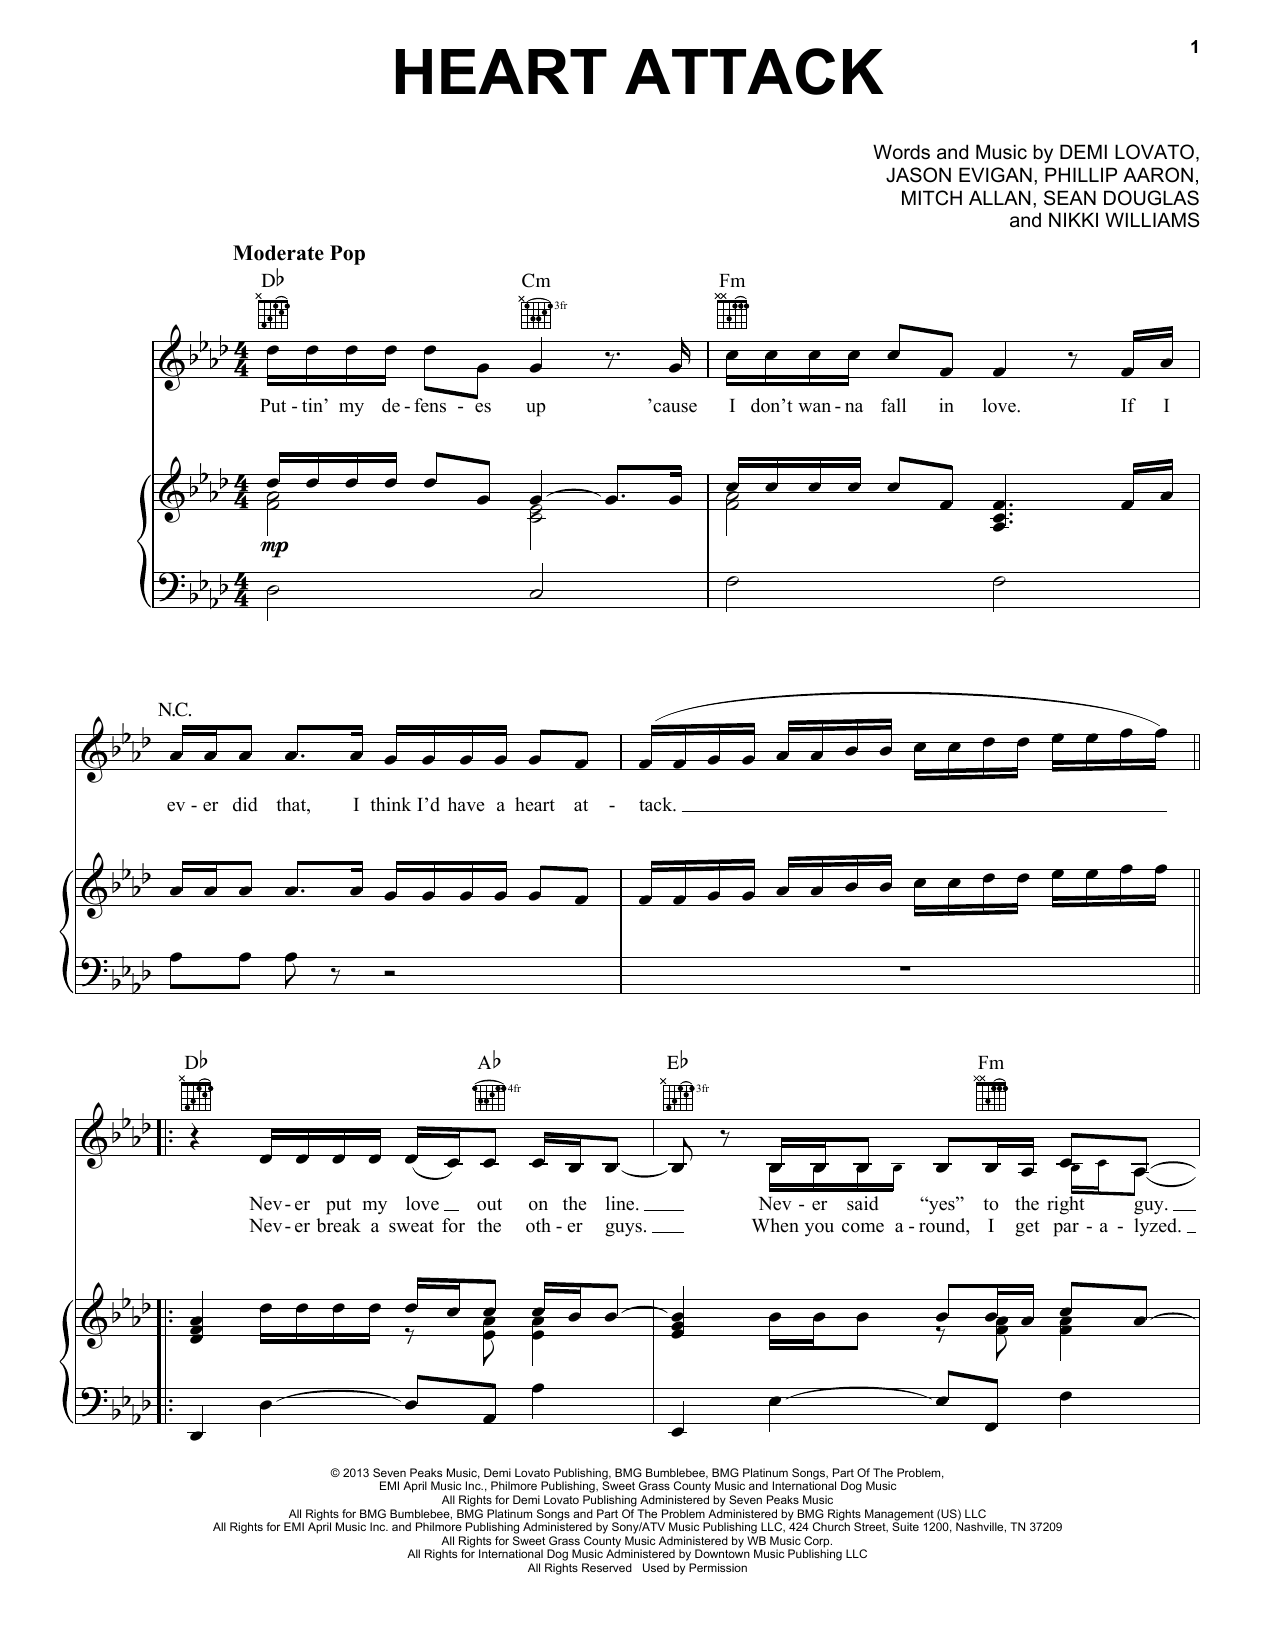 Demi Lovato Heart Attack sheet music notes and chords. Download Printable PDF.